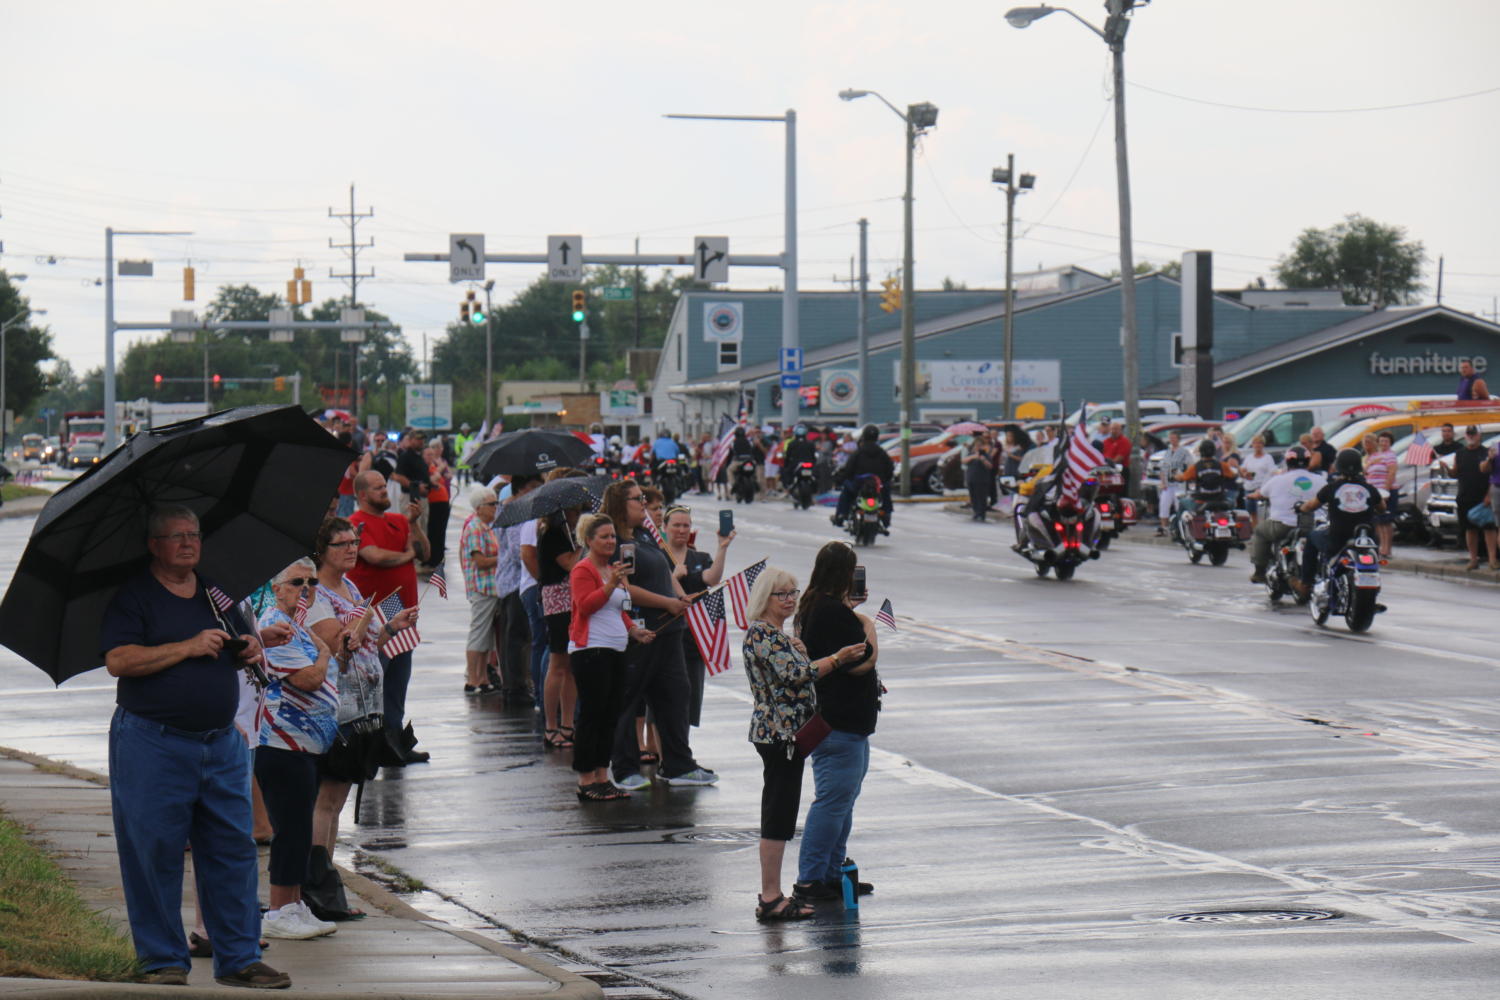 Community members observe Sgt. Jonathan Hunters funeral procession as it travels down 25th Street.